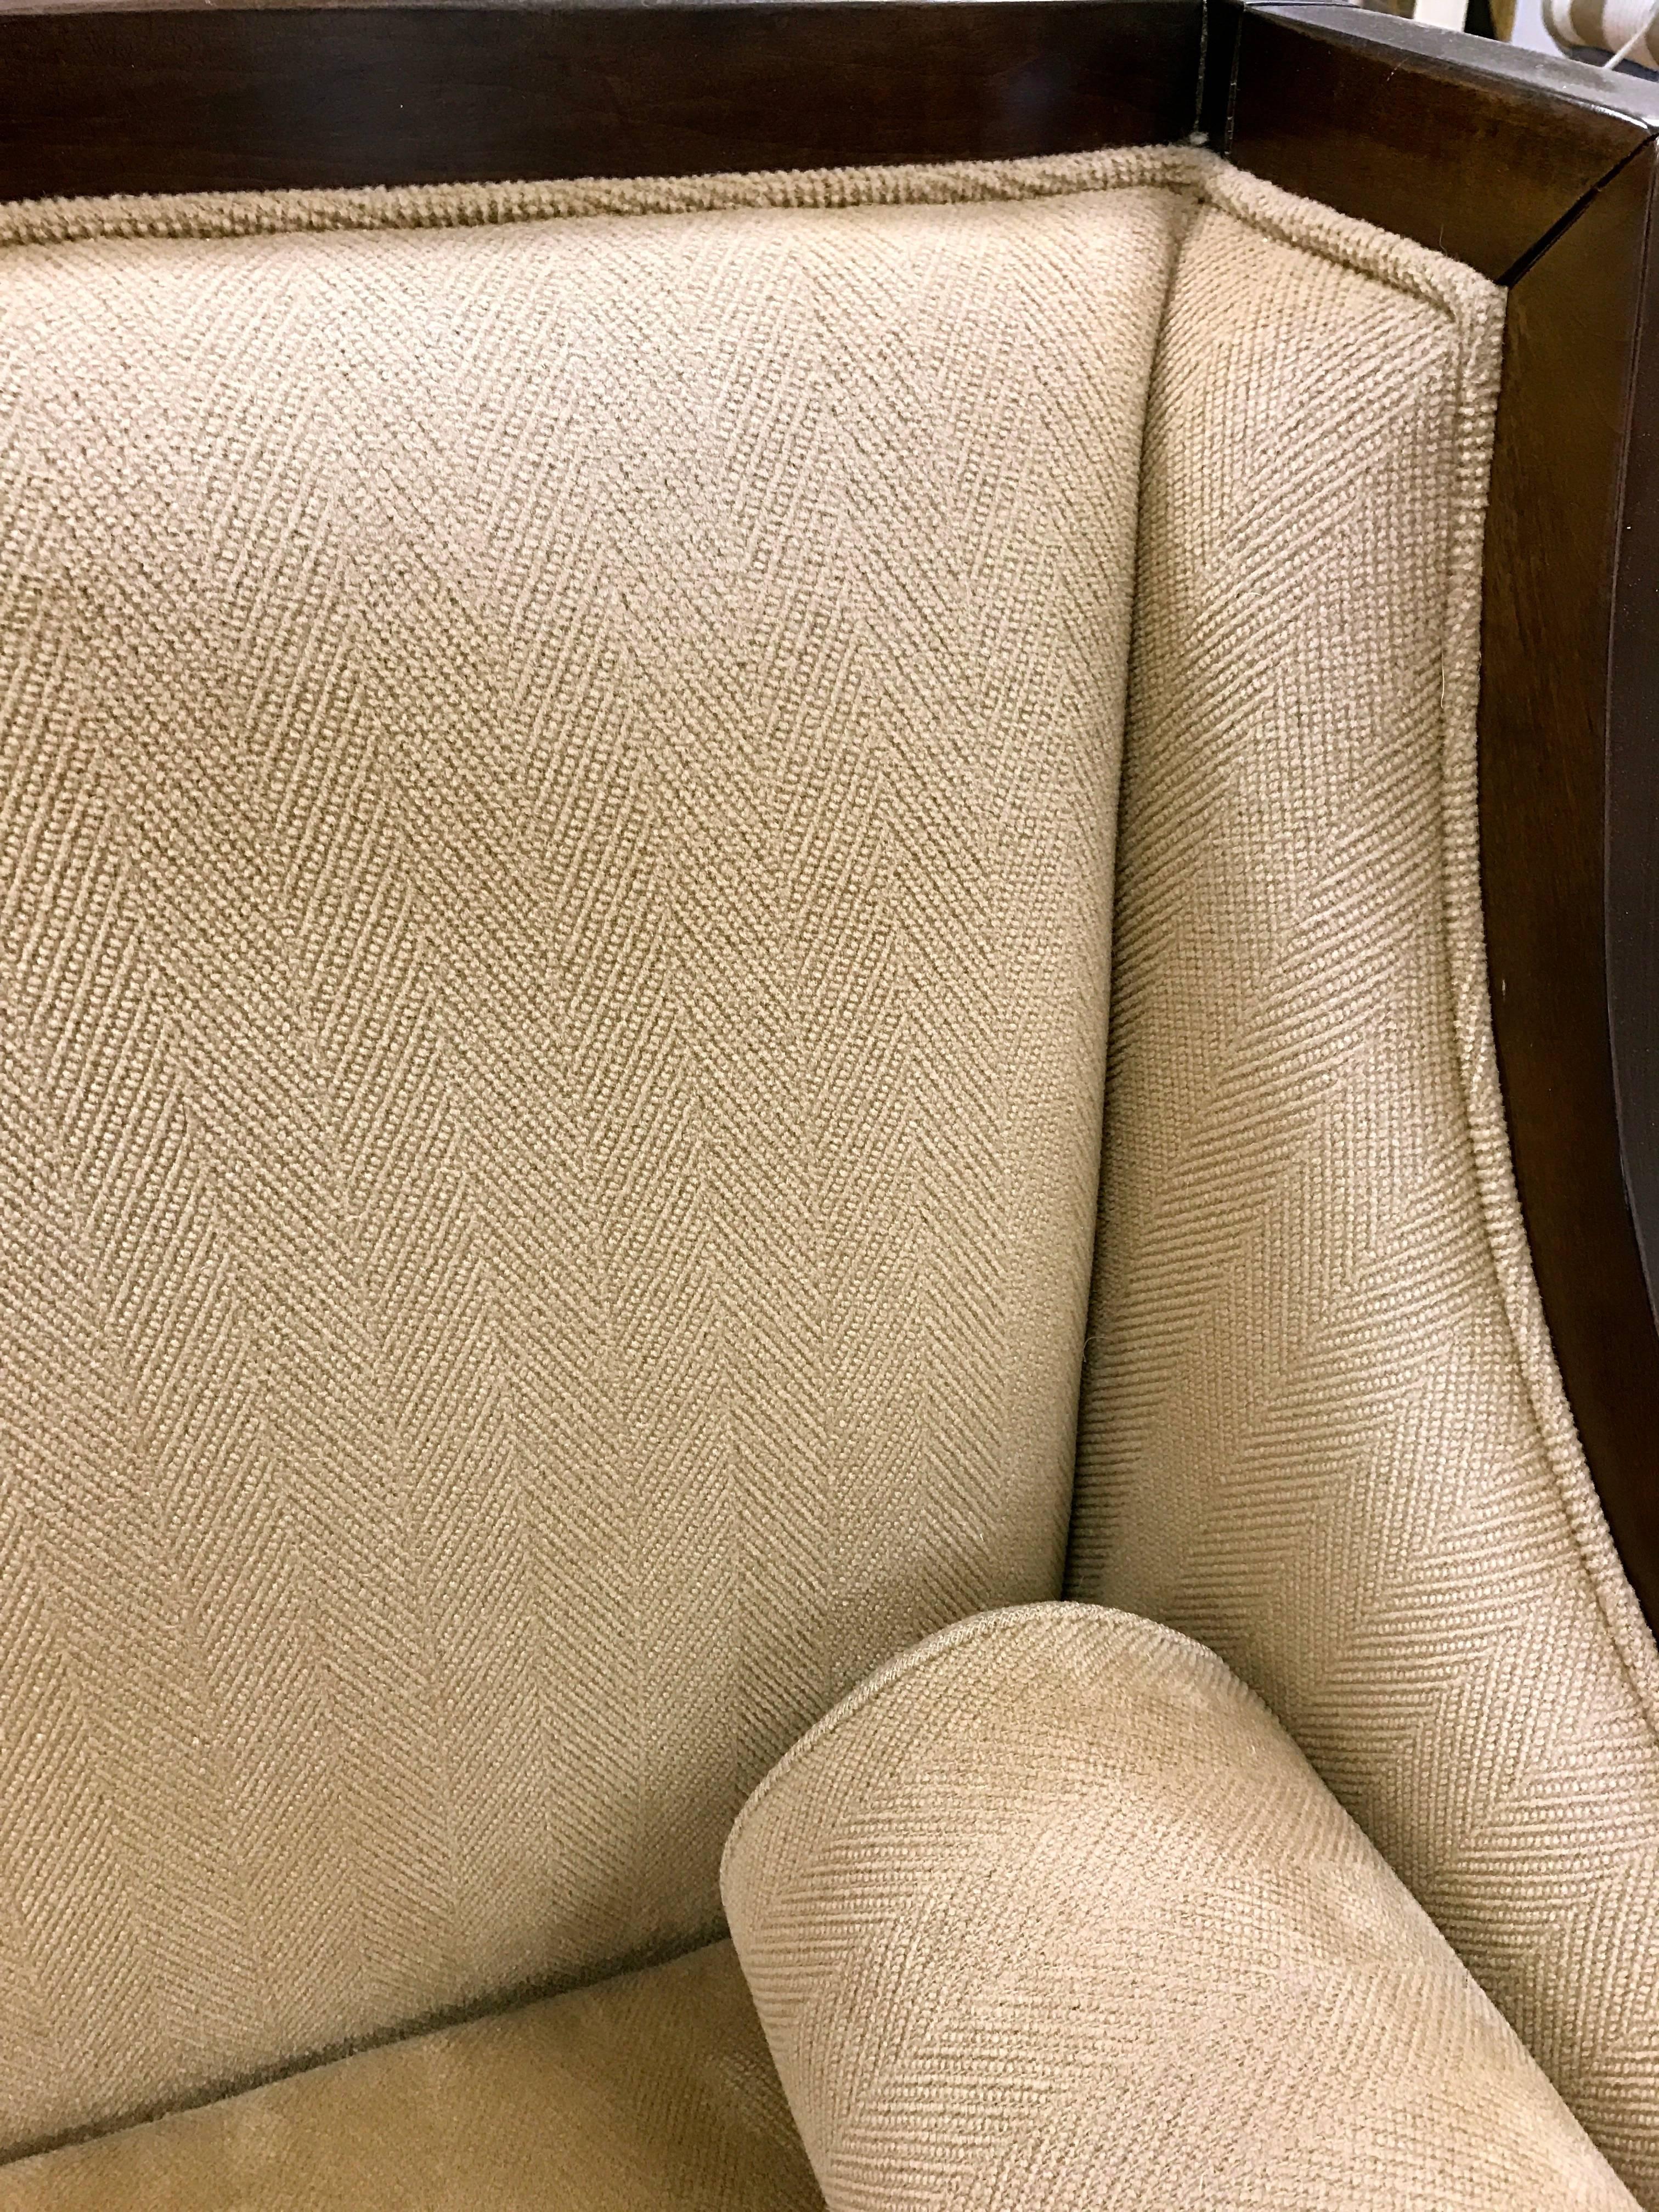 Swaim Tuxedo Sofa with Bolster Pillows In Good Condition In West Hartford, CT